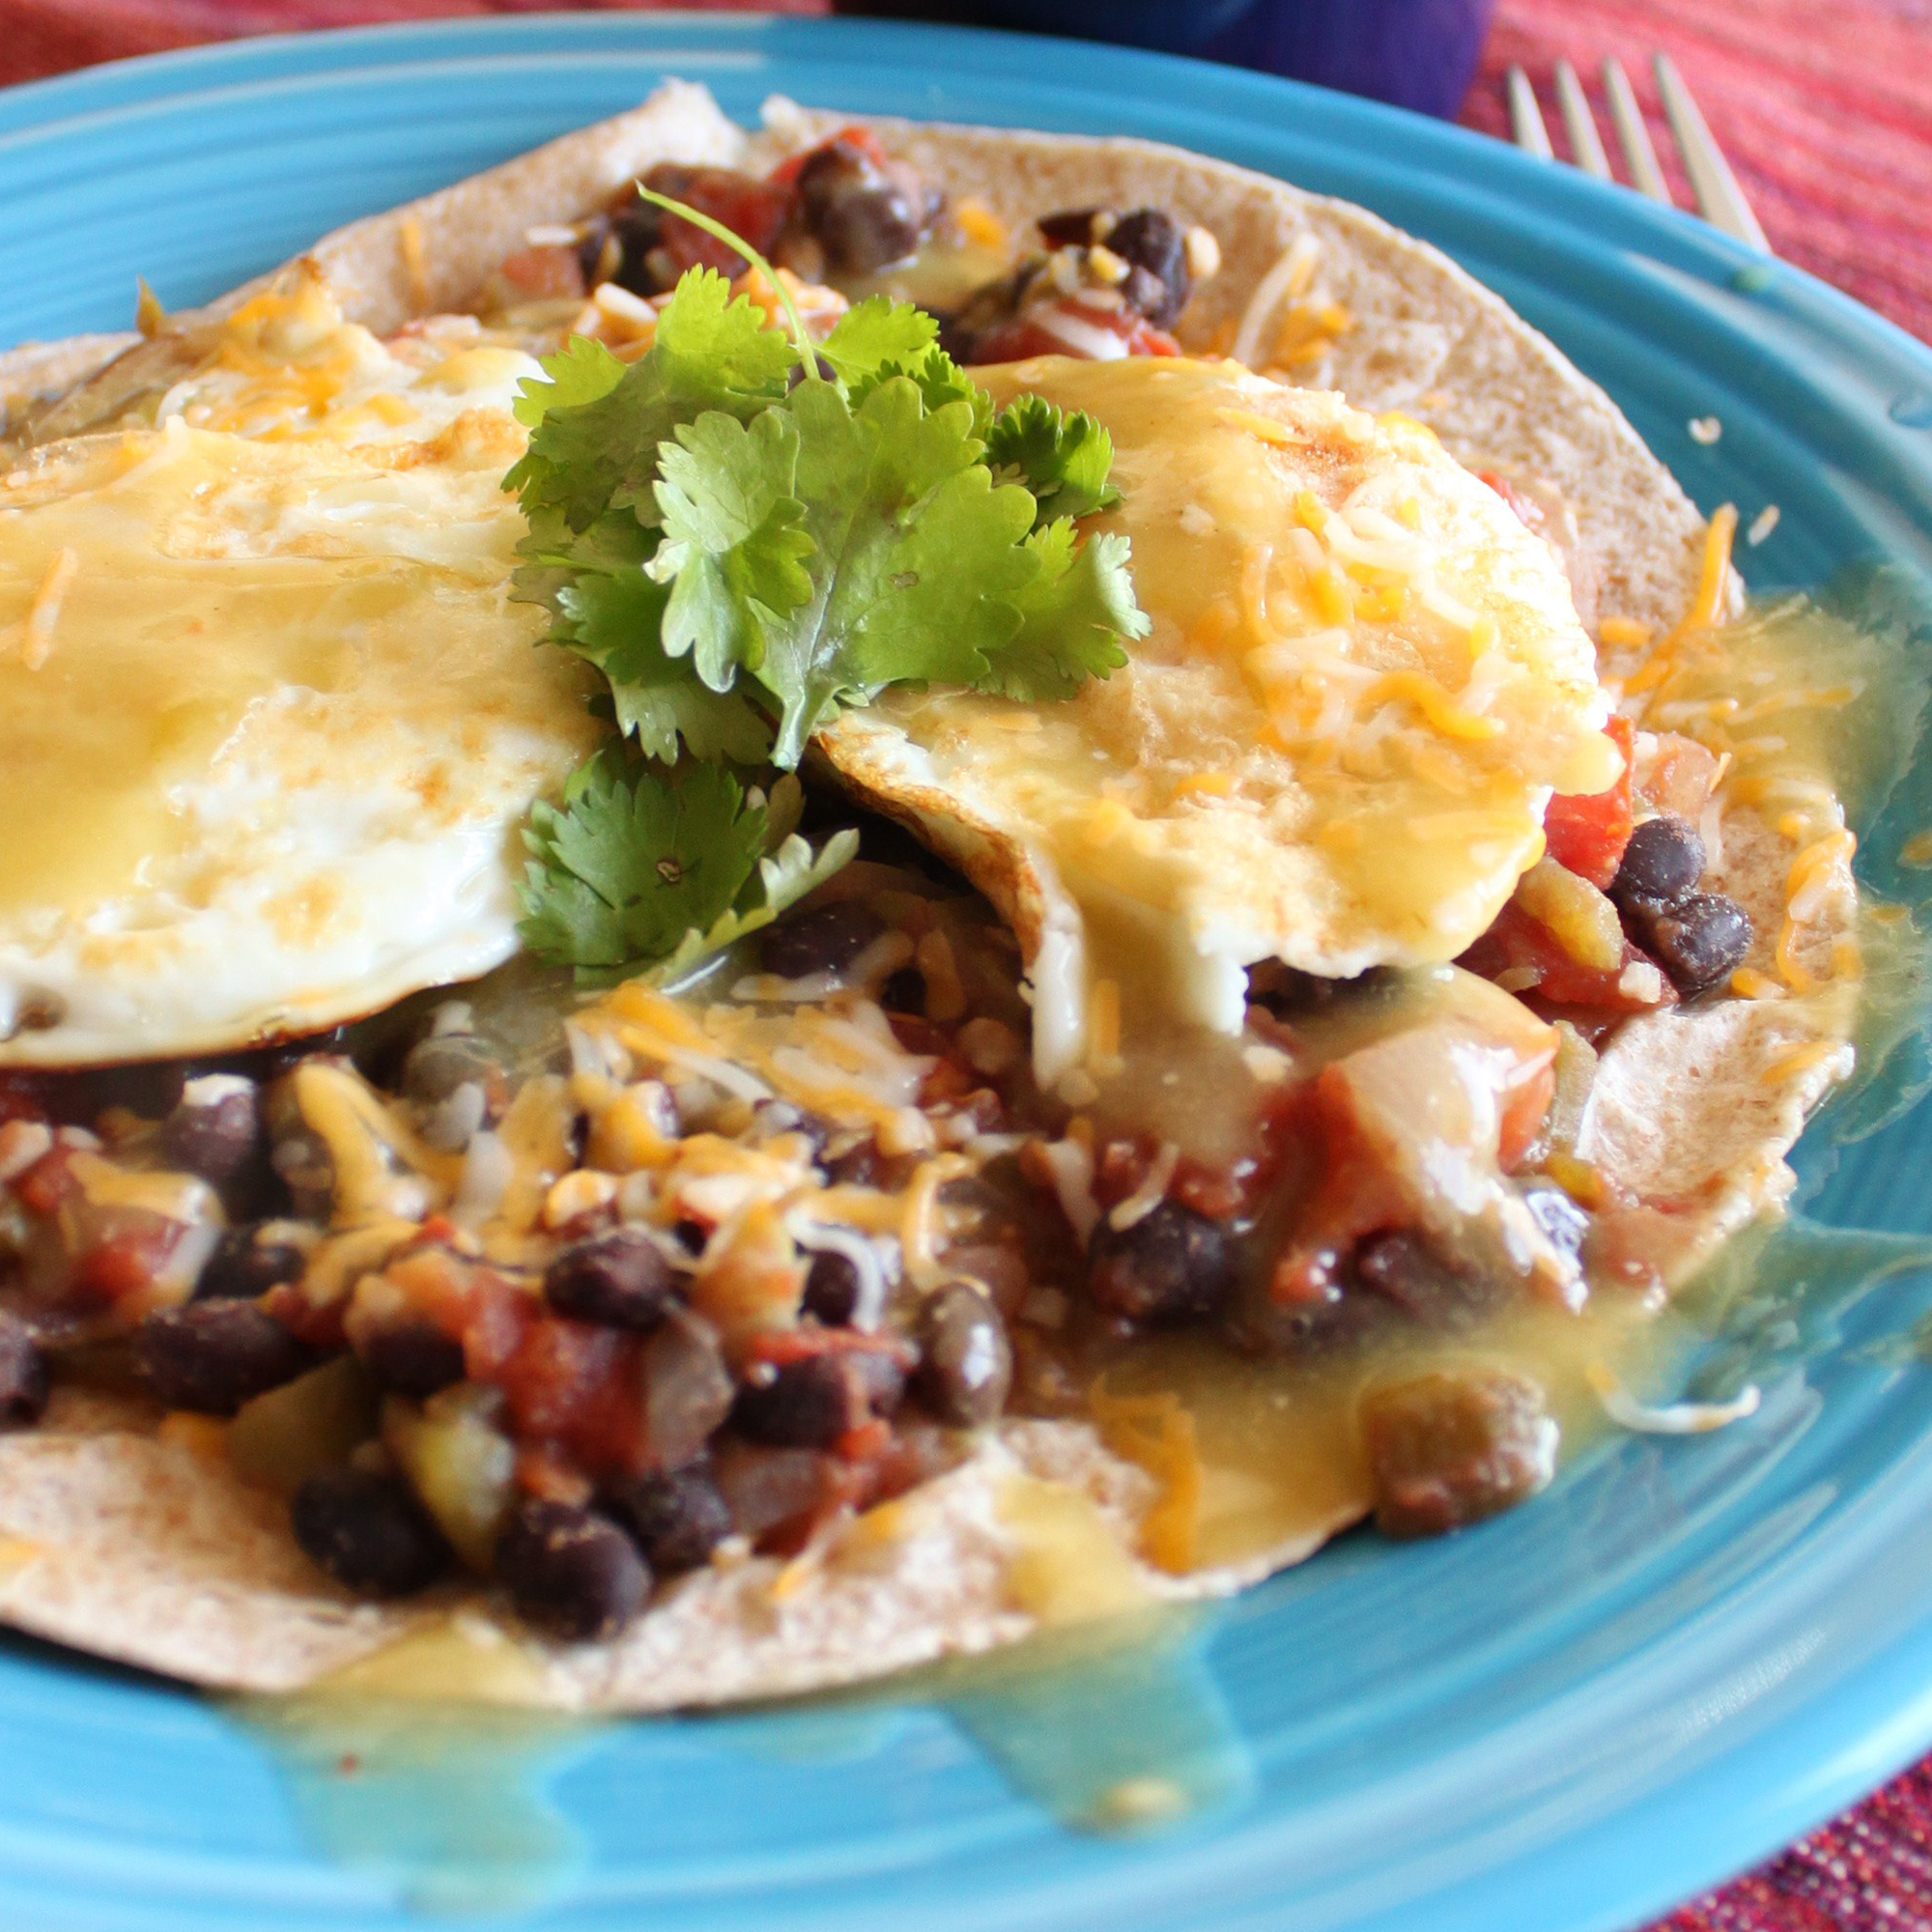 close up view of Black Bean Huevos Rancheros on a tortilla, garnished with fresh herbs, on a blue plate